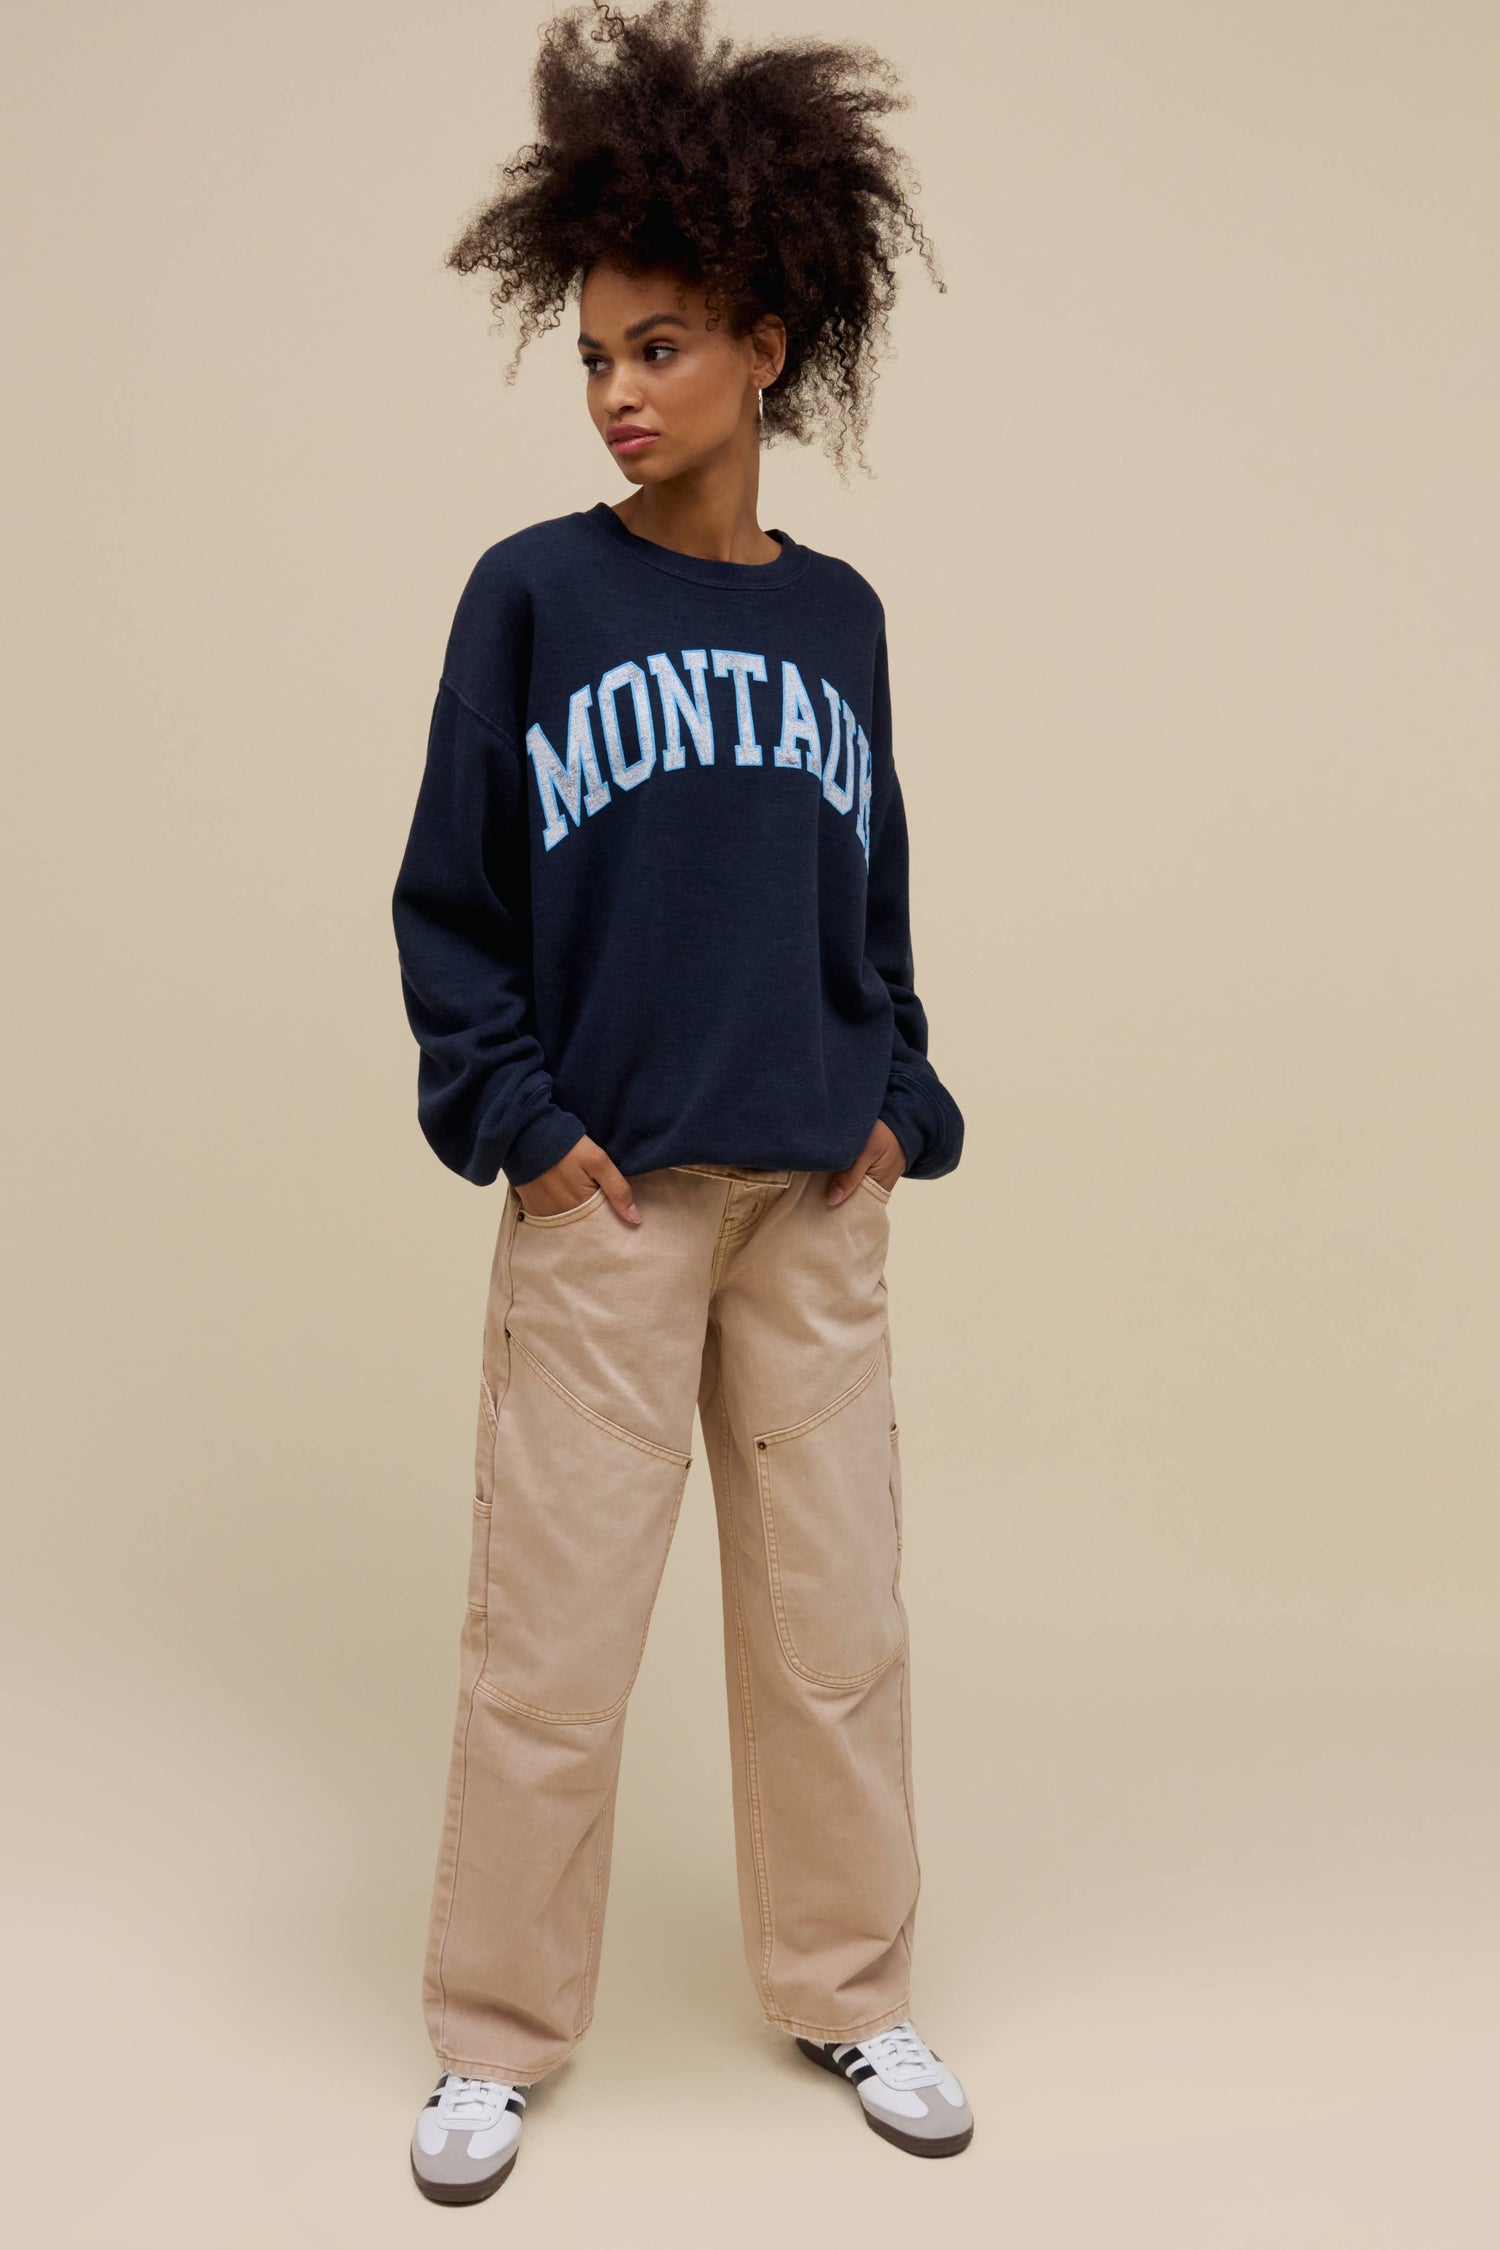 Curly-haired model wearing an oversized tri-blend fleece sweatshirt in navy heather with contrast light blue 'Montauk' collegiate style lettering